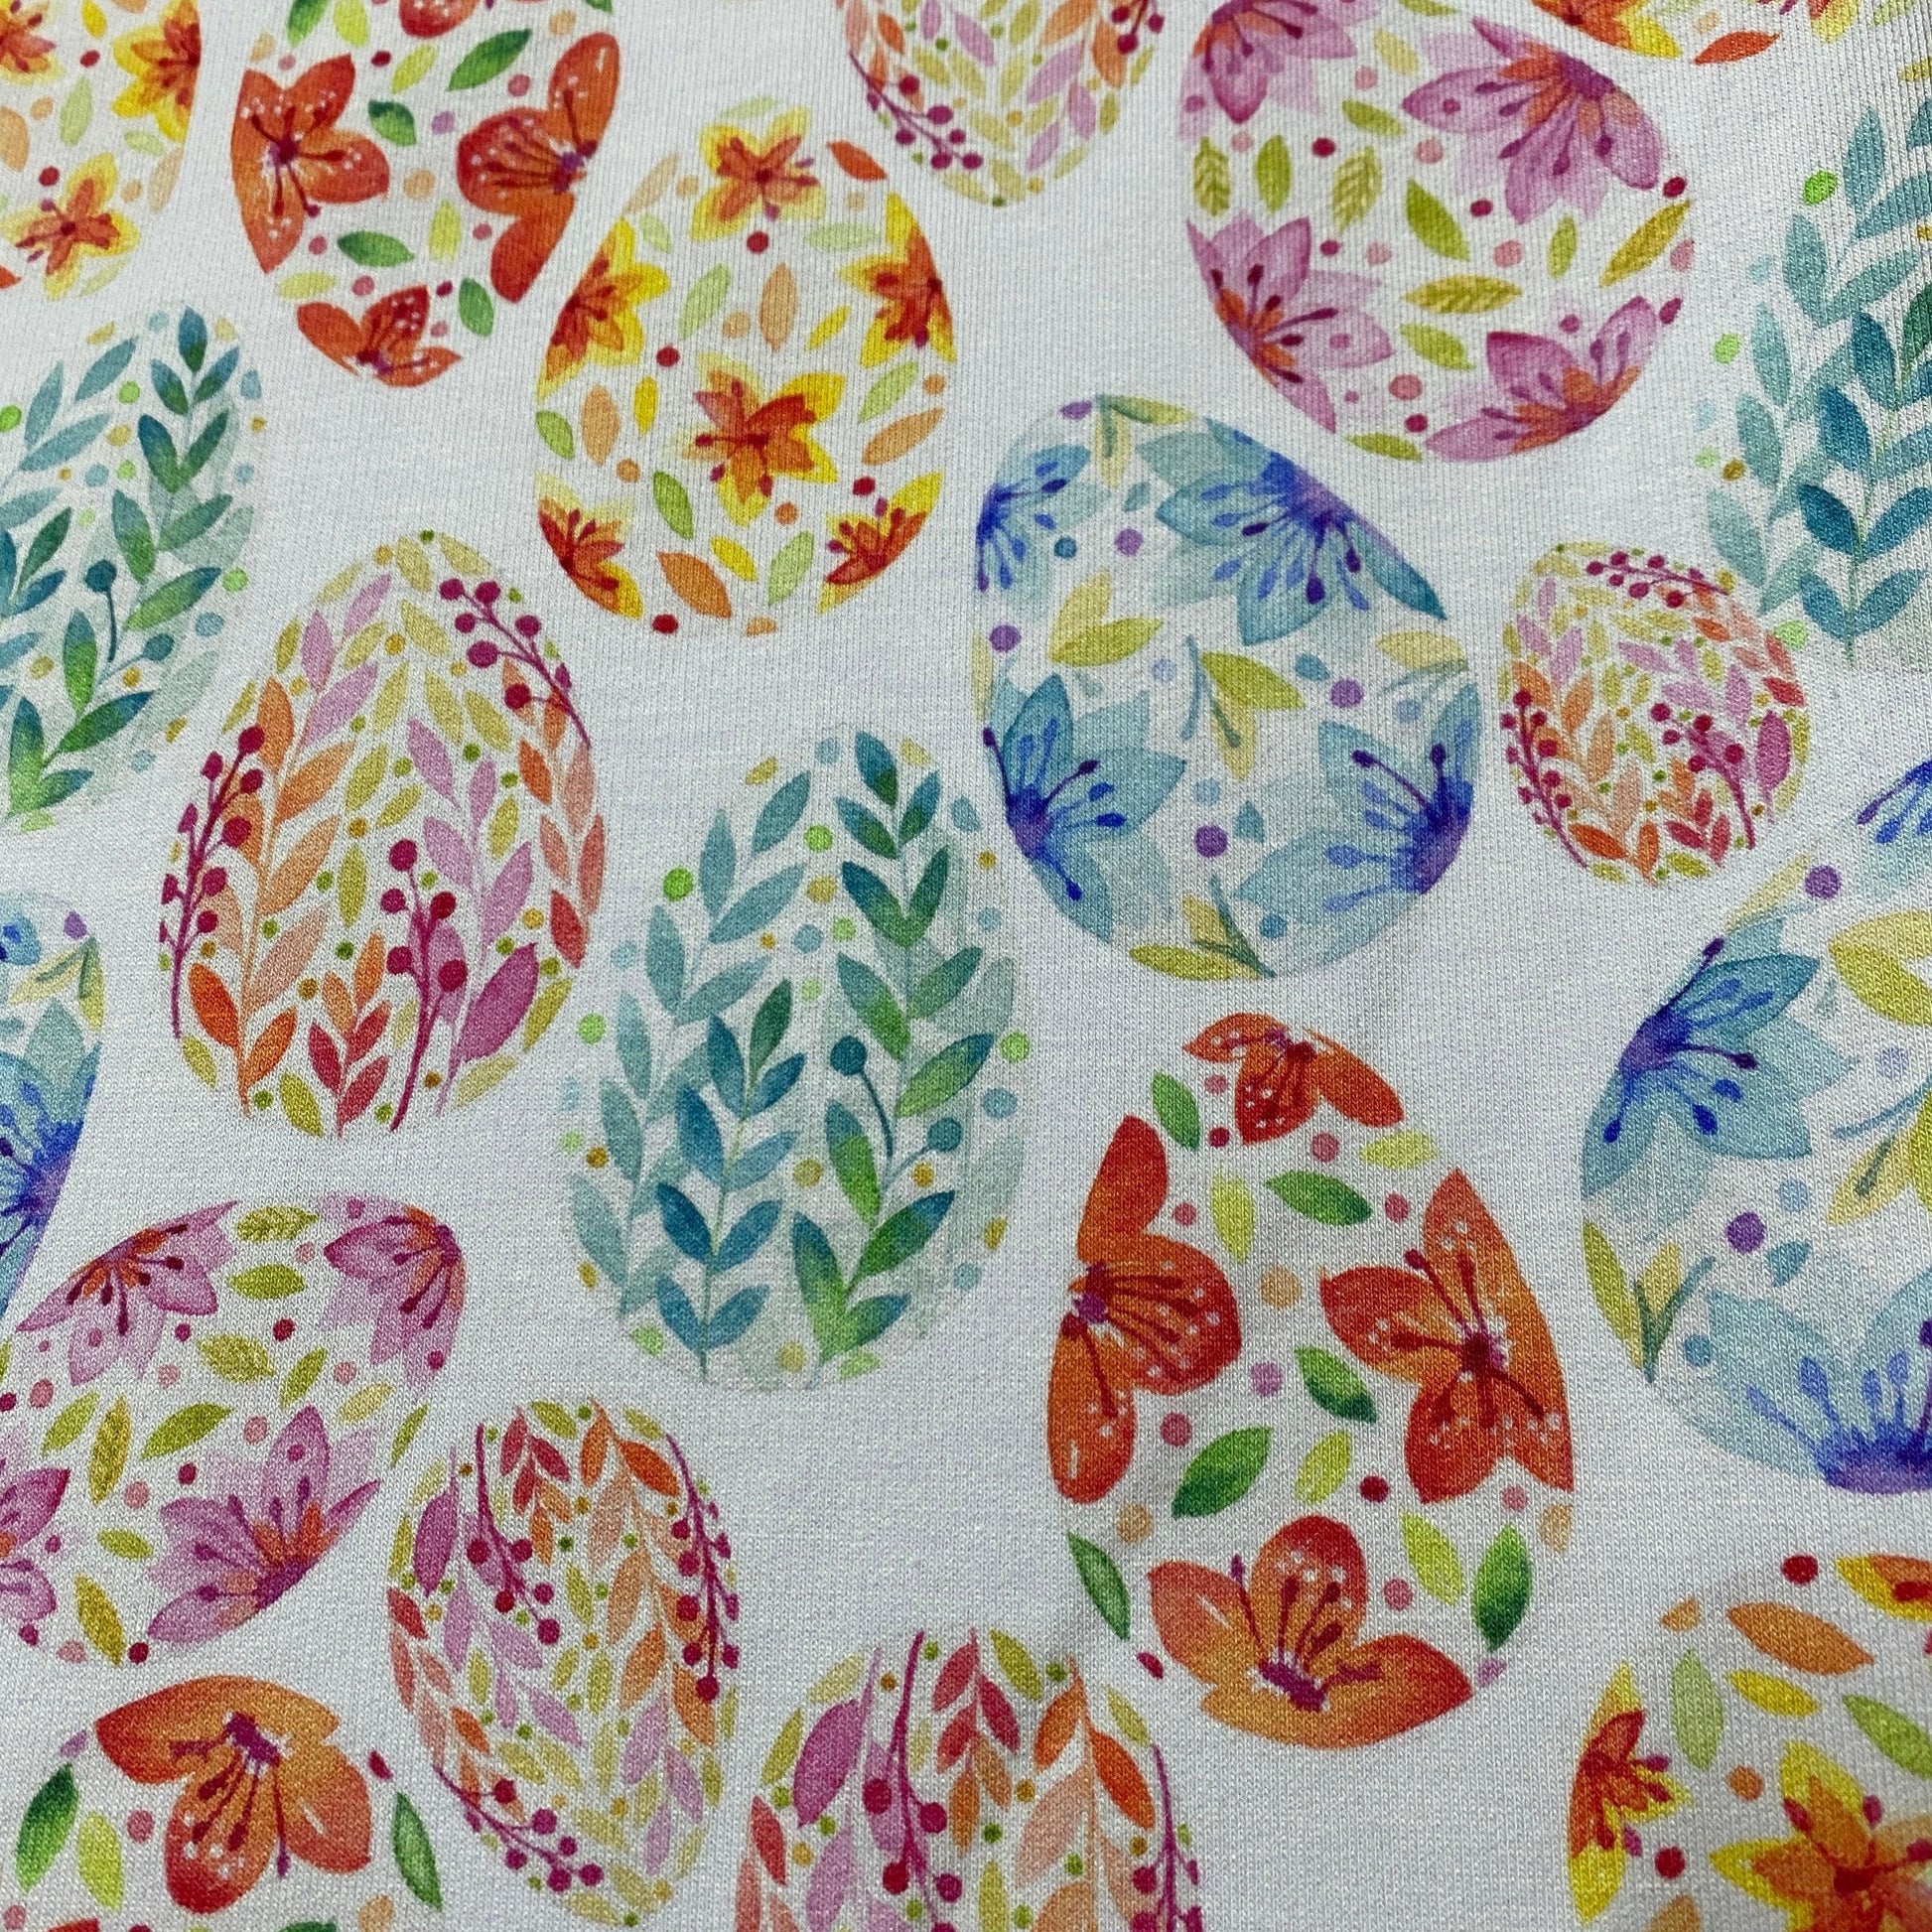 Floral Eggs on Bamboo/Spandex Jersey Fabric - Nature's Fabrics